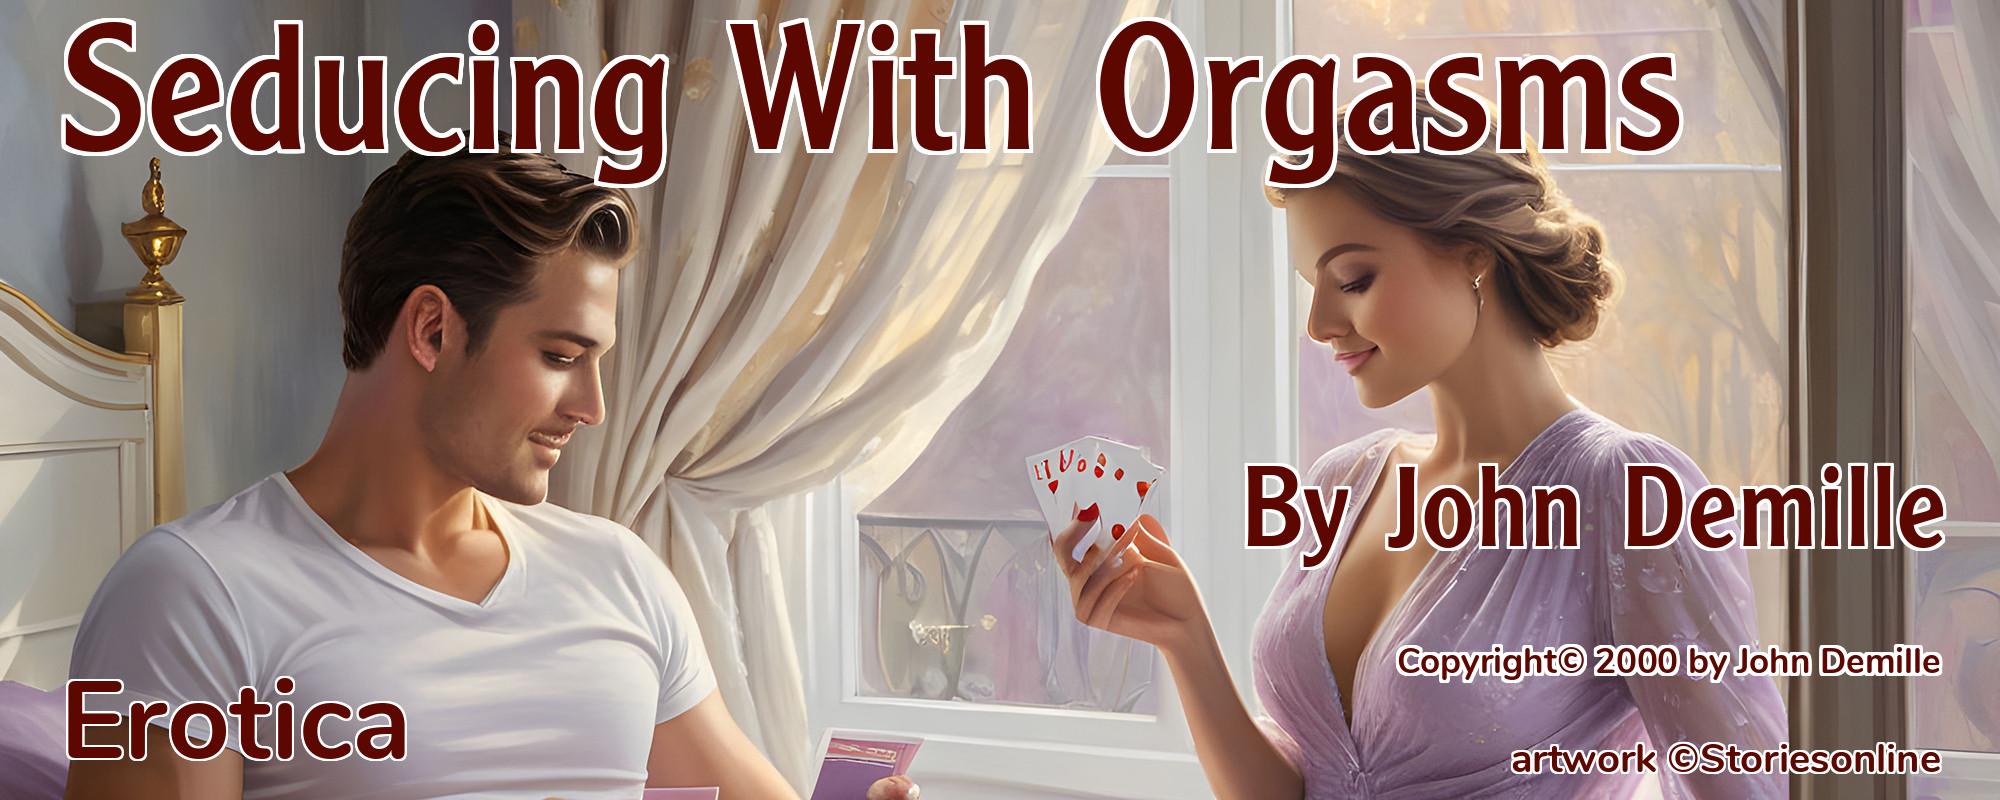 Seducing With Orgasms - Cover